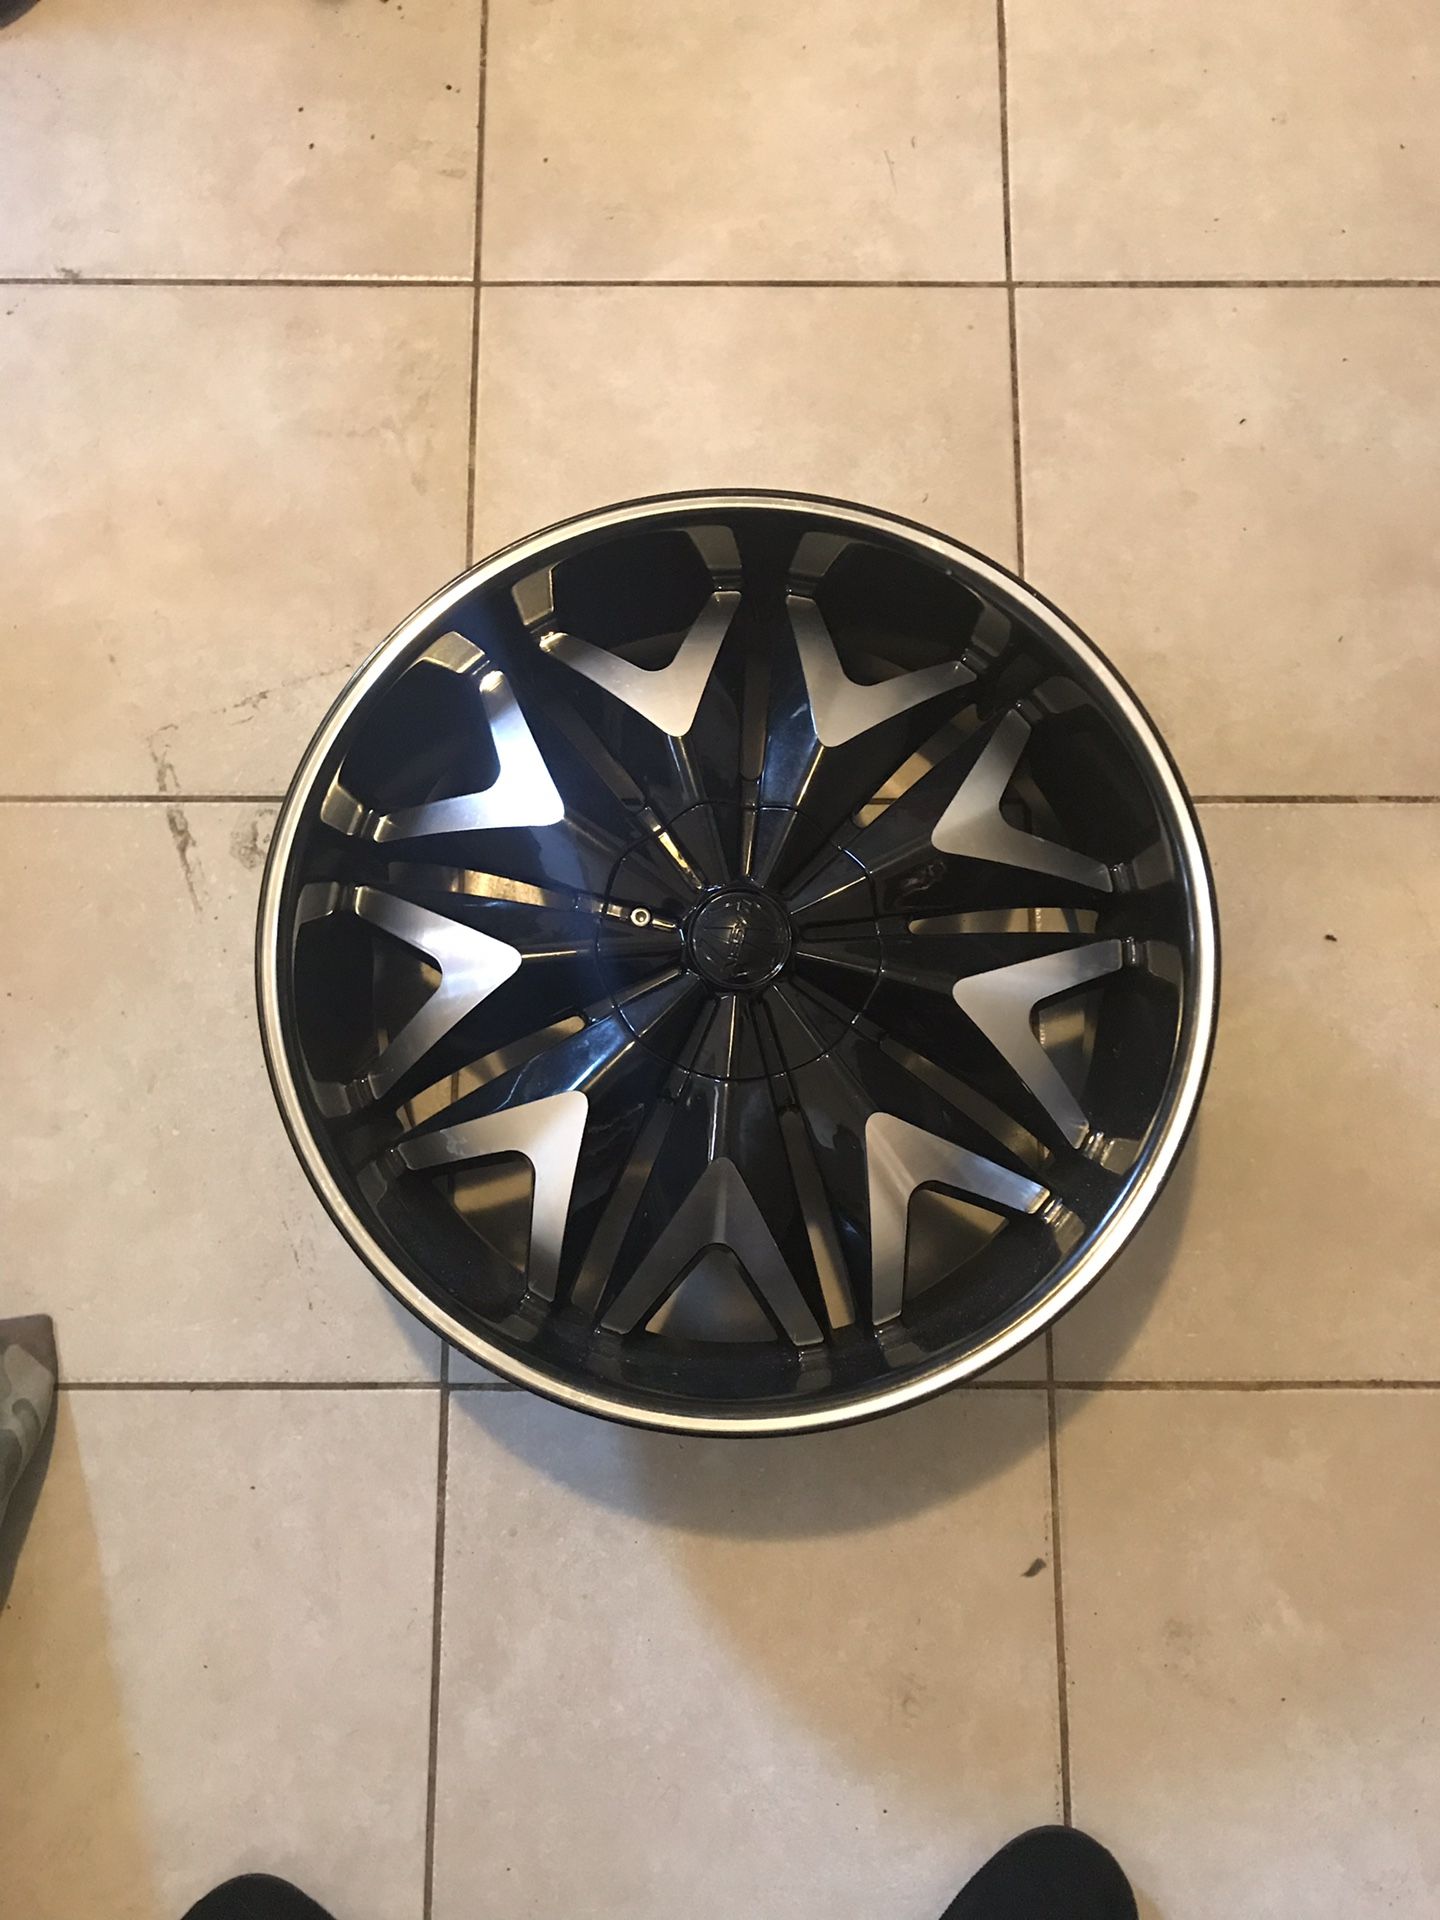 (4 ) never used! nearly mint condition 20 inch rims, black and Polished aluminum . Bolt Pattern list 5 X 115. Make sure u know what your lug pattern